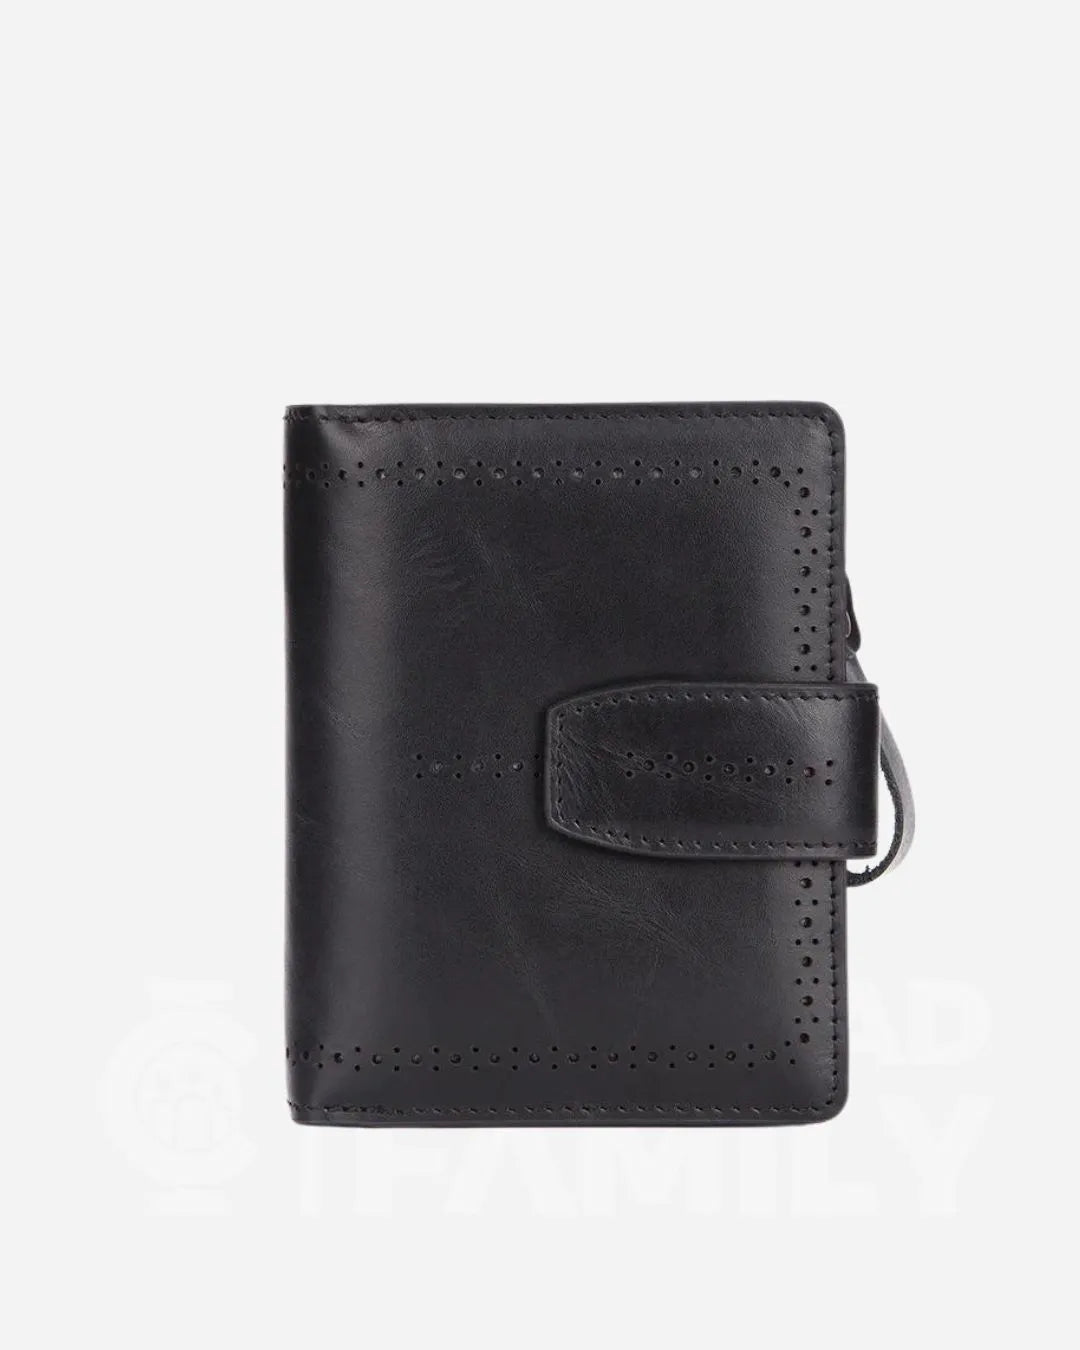 RFID blocking black leather wallet featuring a zipper